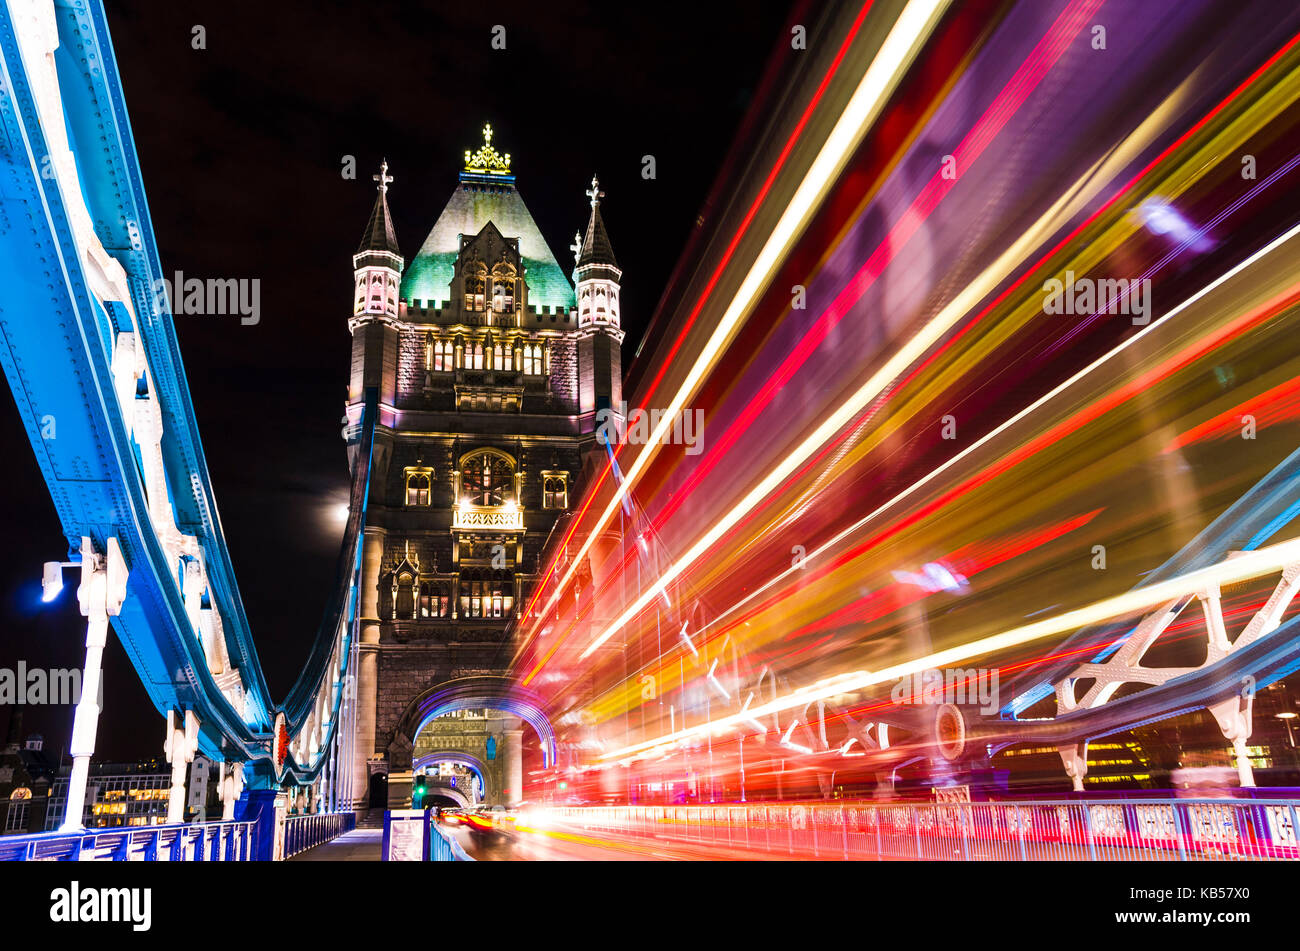 Tower Bridge in London, UK with moving red double-decker bus Stock Photo